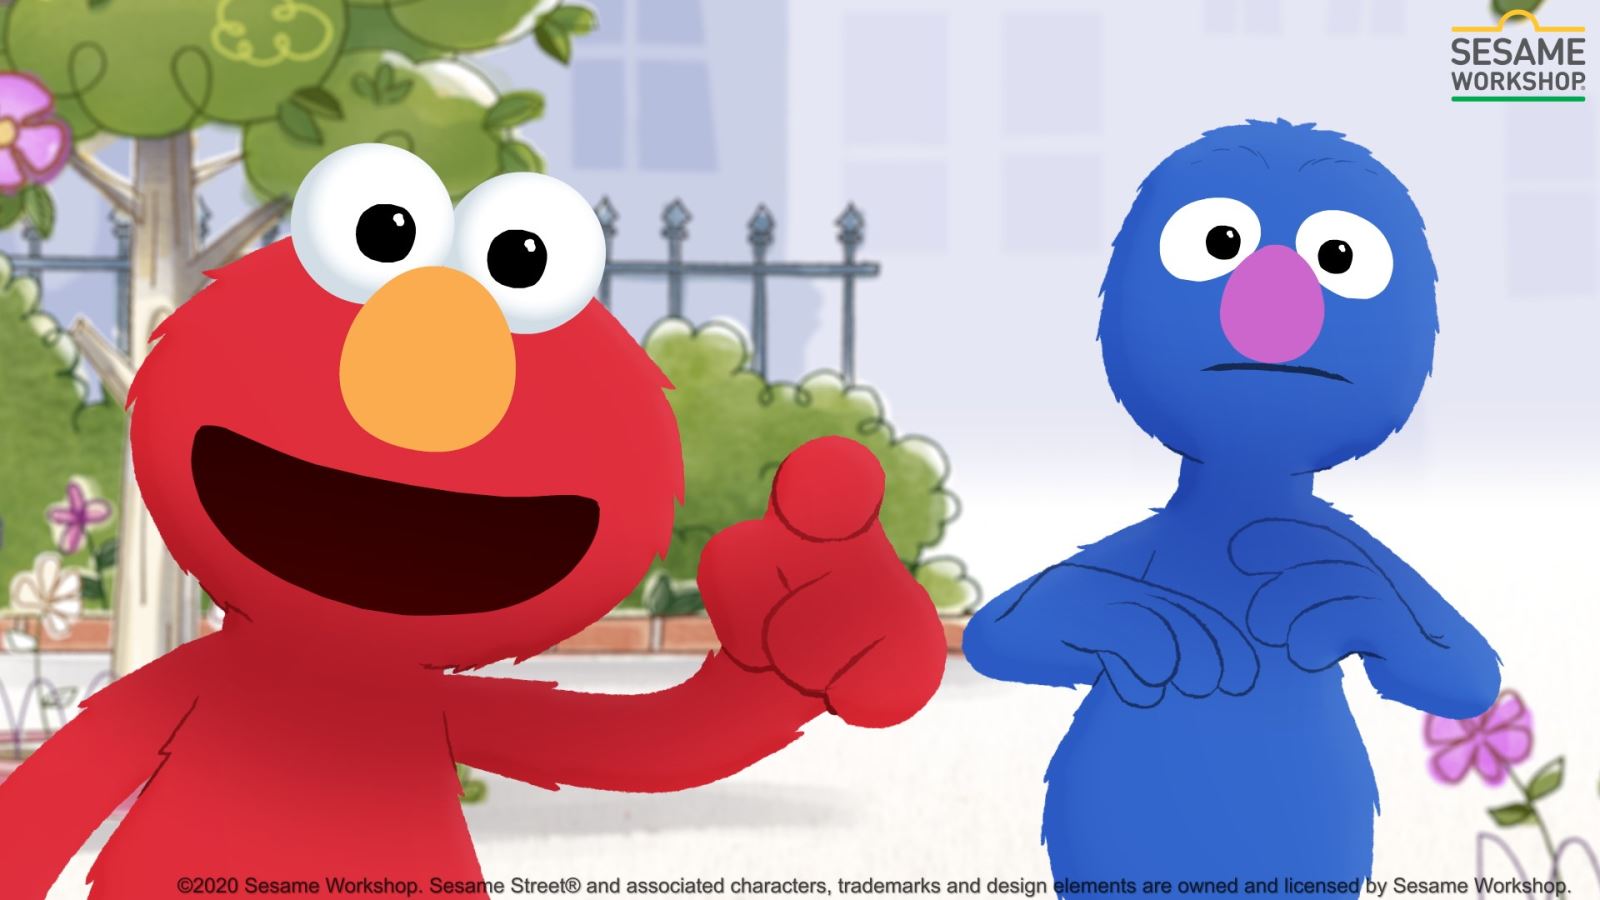 Stills from the spin-off short of Sesame Street's first-ever animated special: The Monster at the End of This Story. Credit and copyright: Sesame Workshop